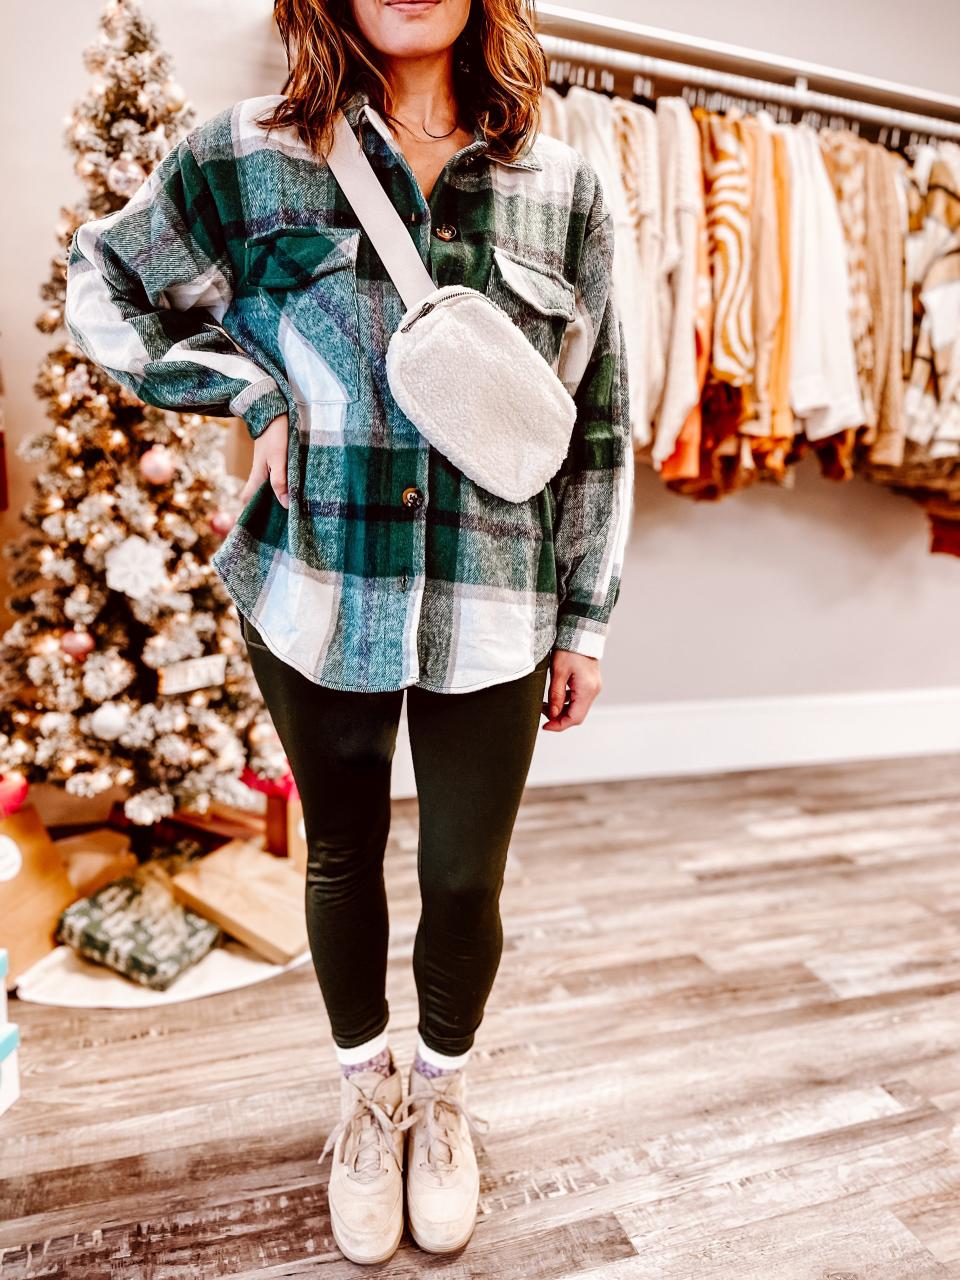 Salt + Pepper Boutique has cozy shackets and cute fanny packs for the holiday season.